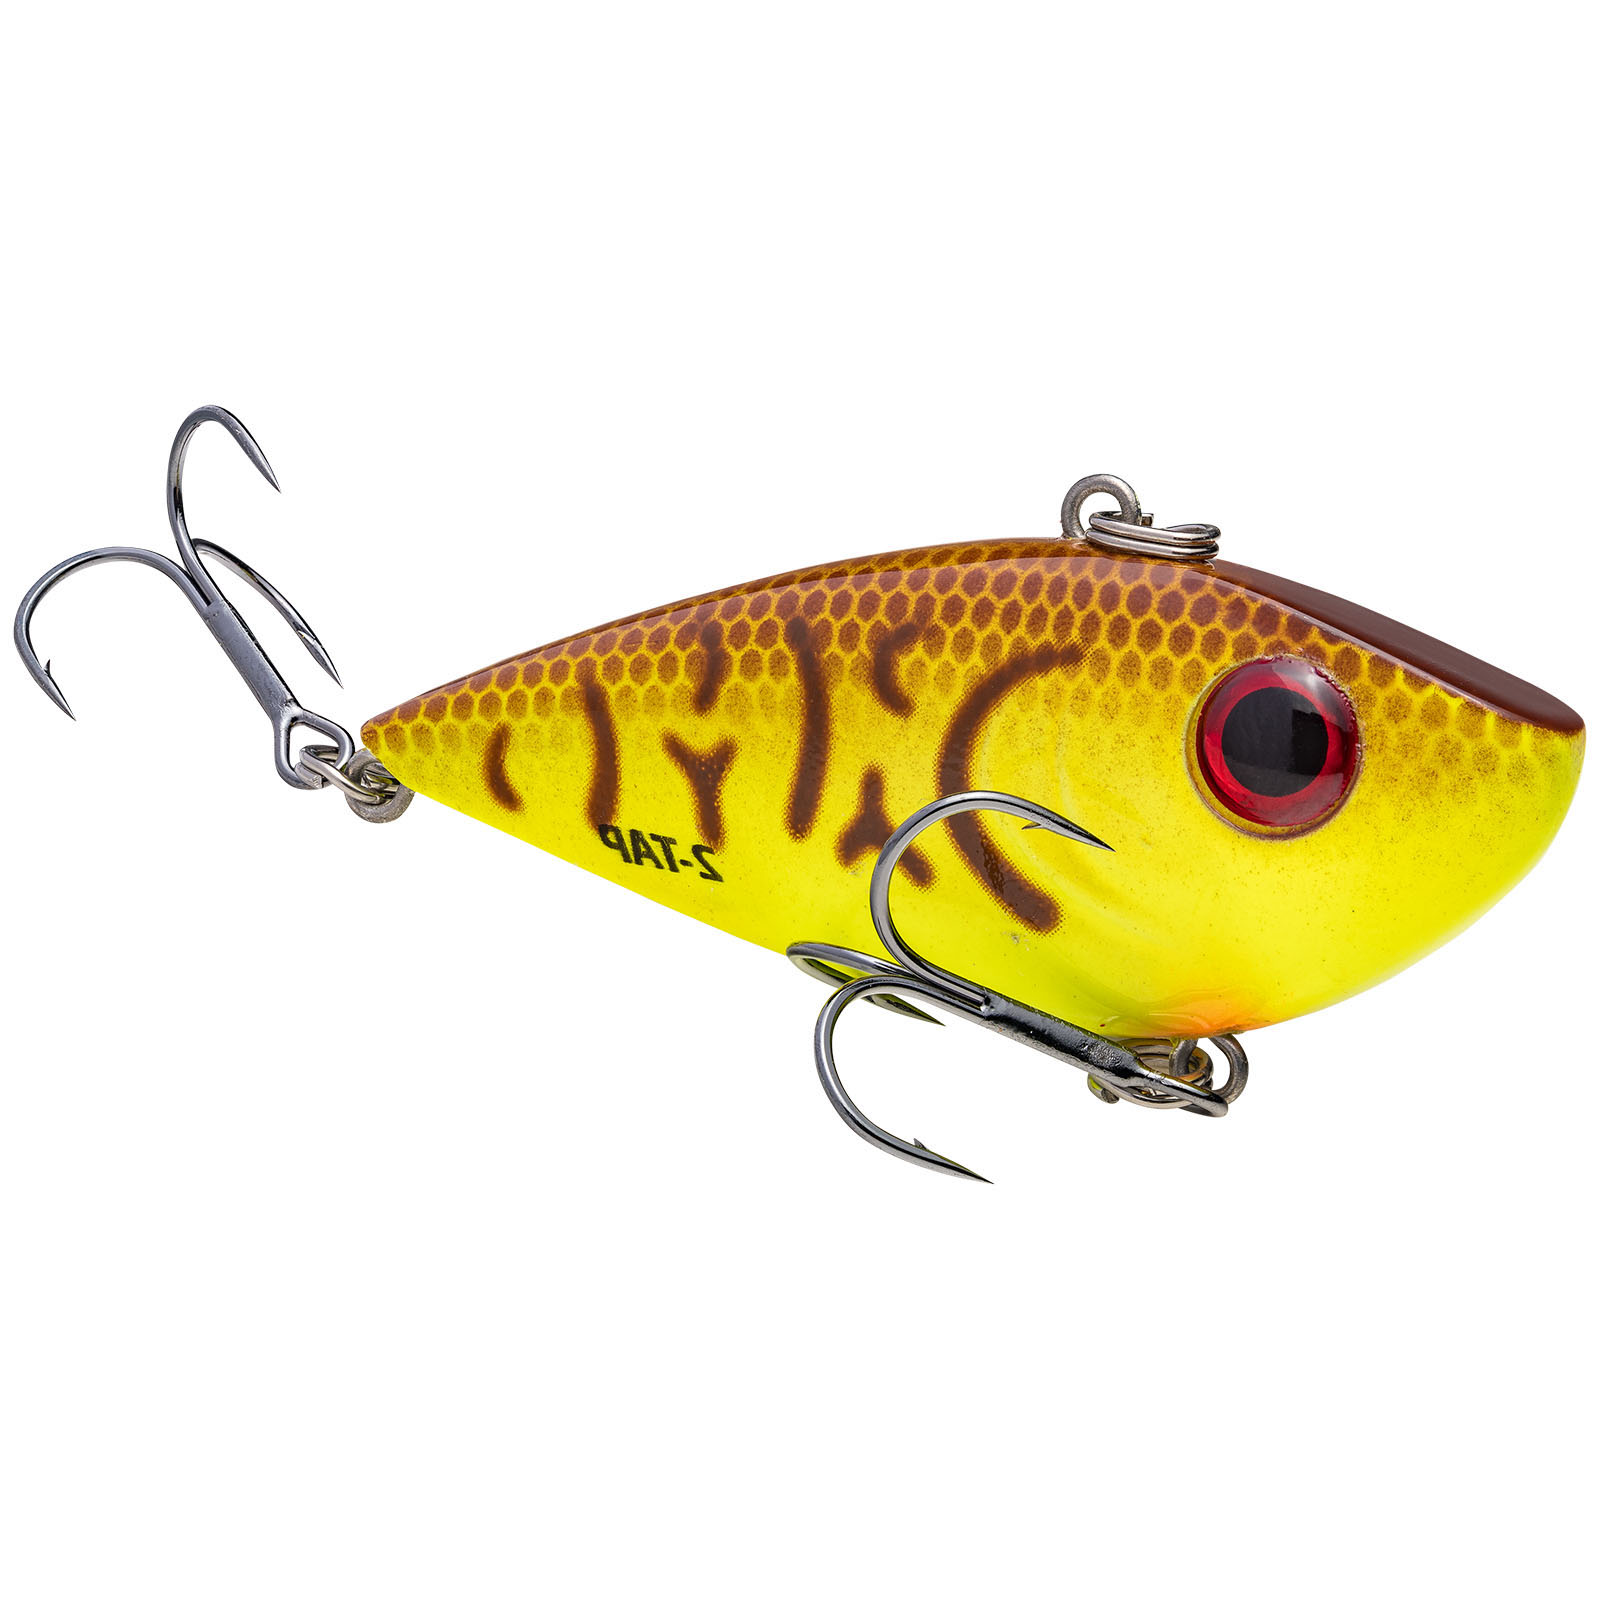 Strike King Sexy Spoon - 5.5 Chartreuse Shad